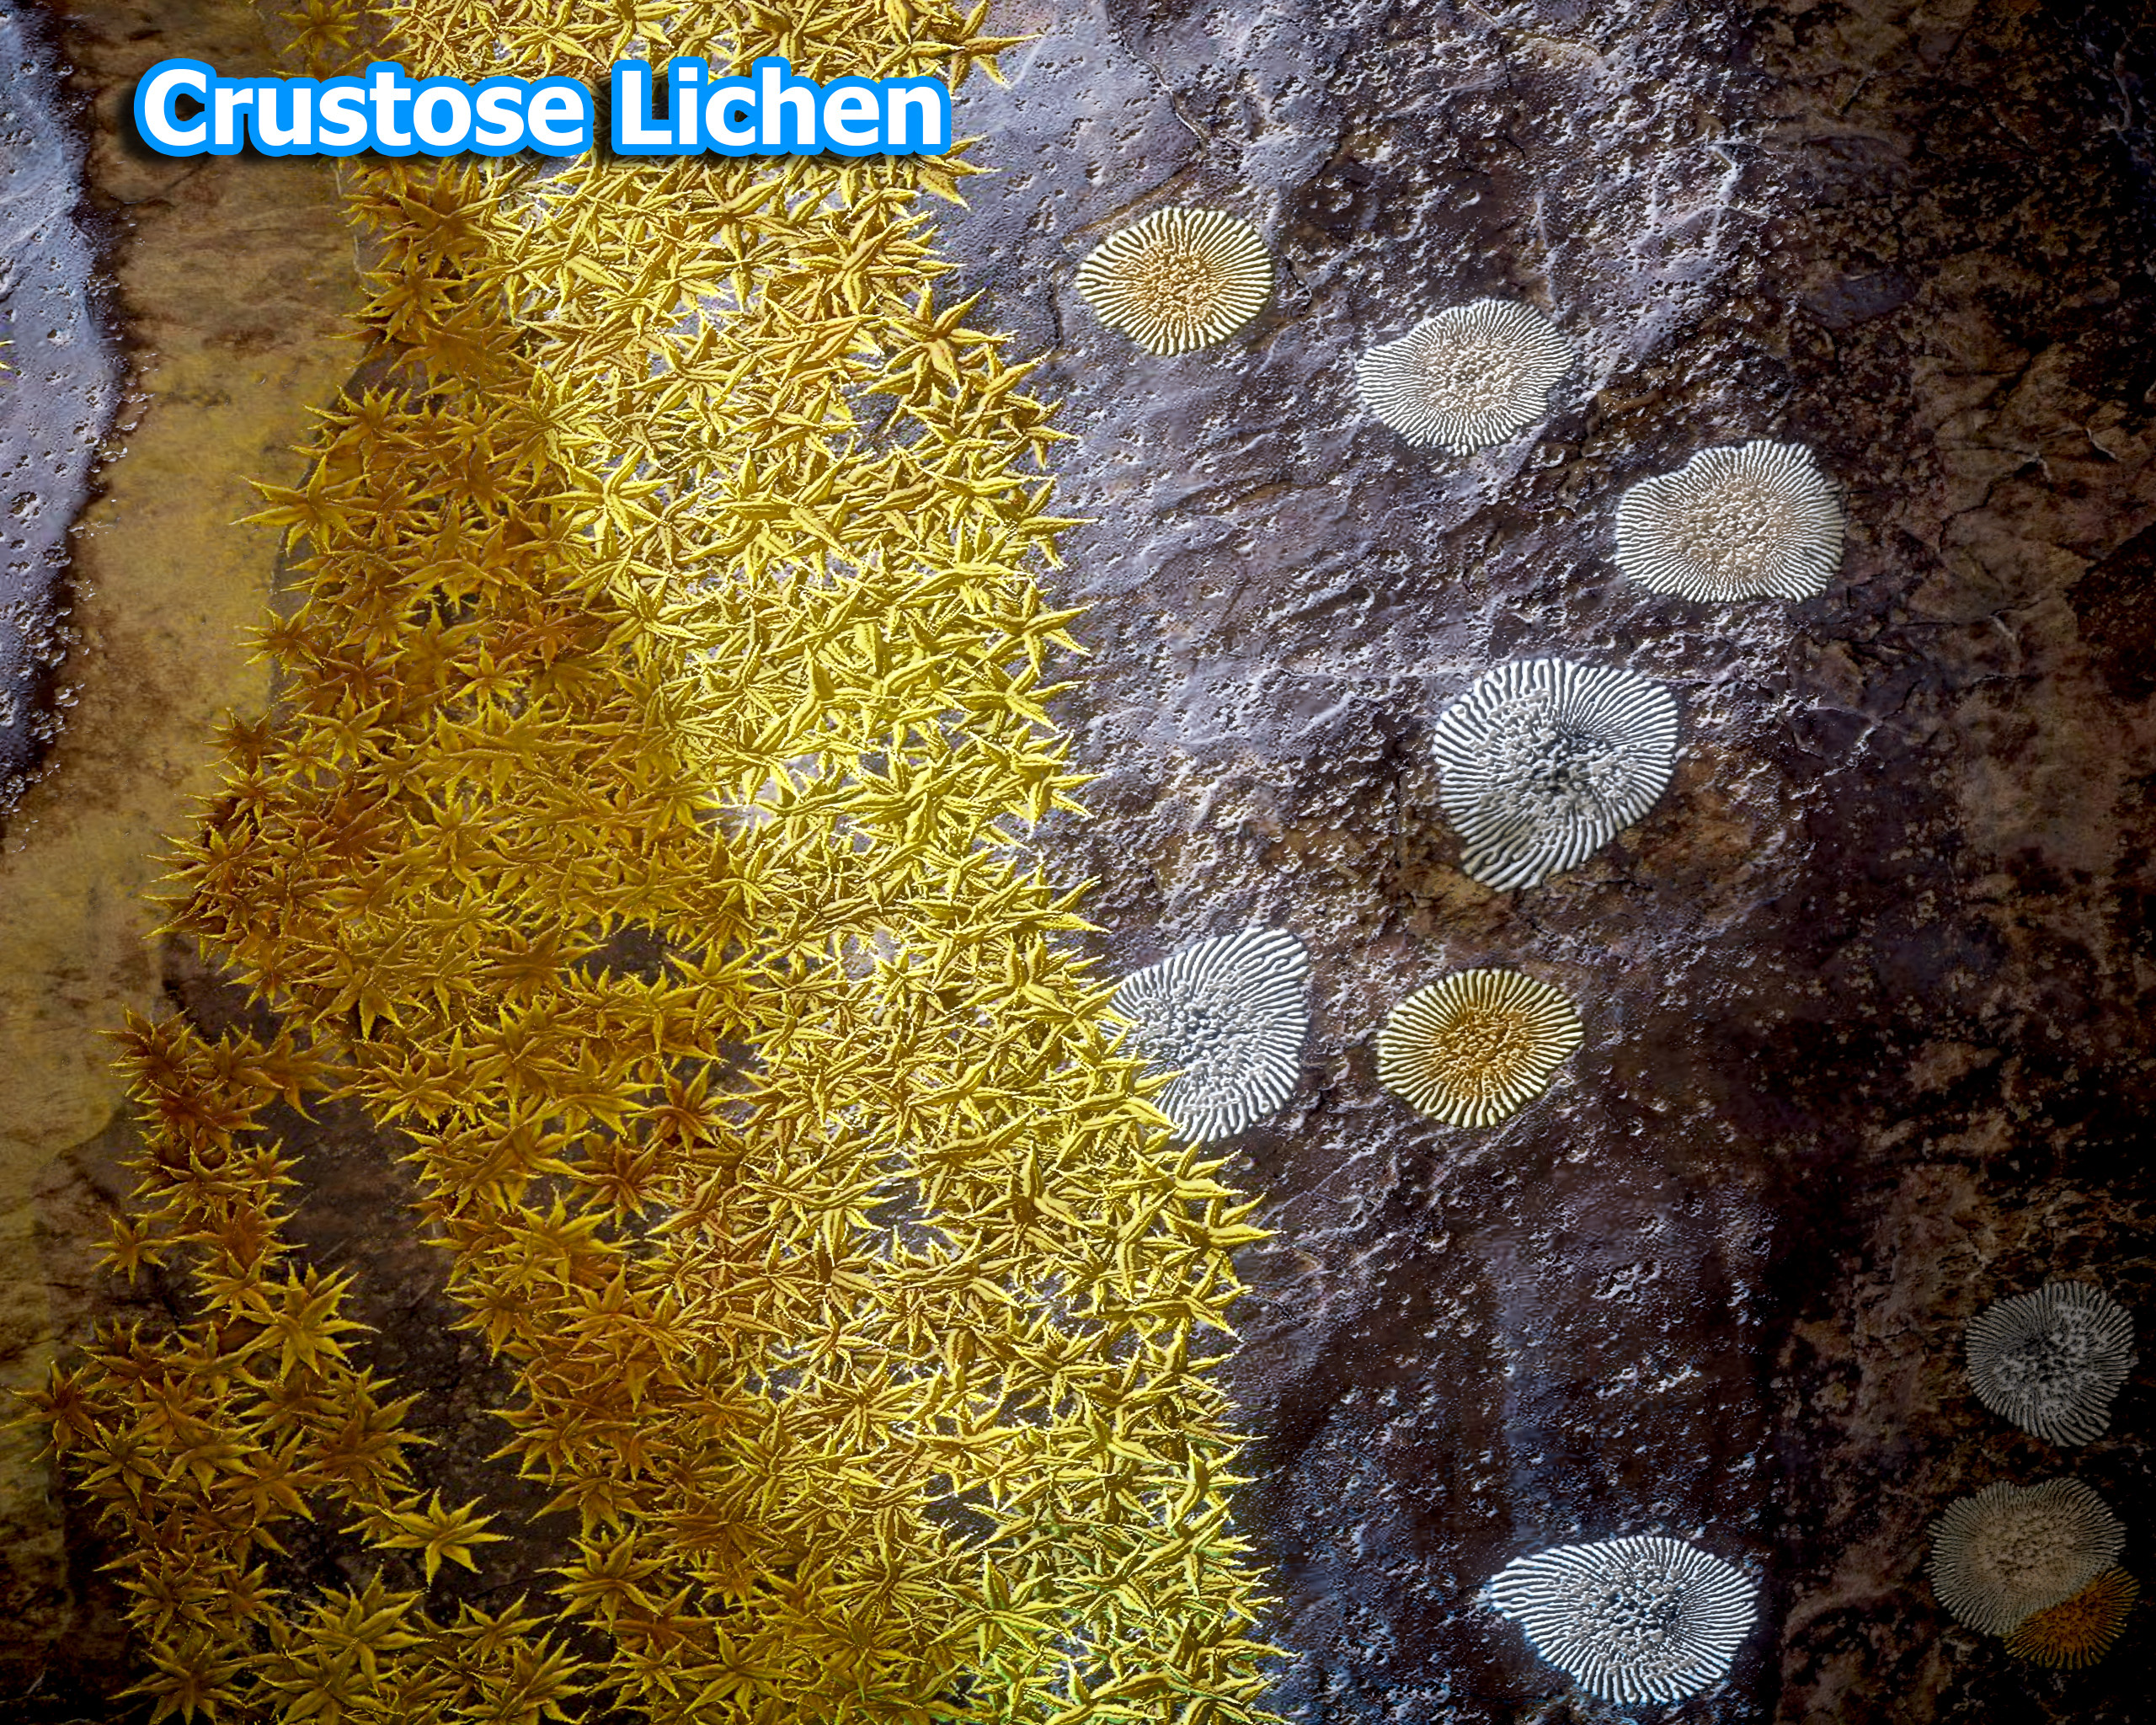 Crustose Lichen grows like a crust that radiates from the center of its shape 